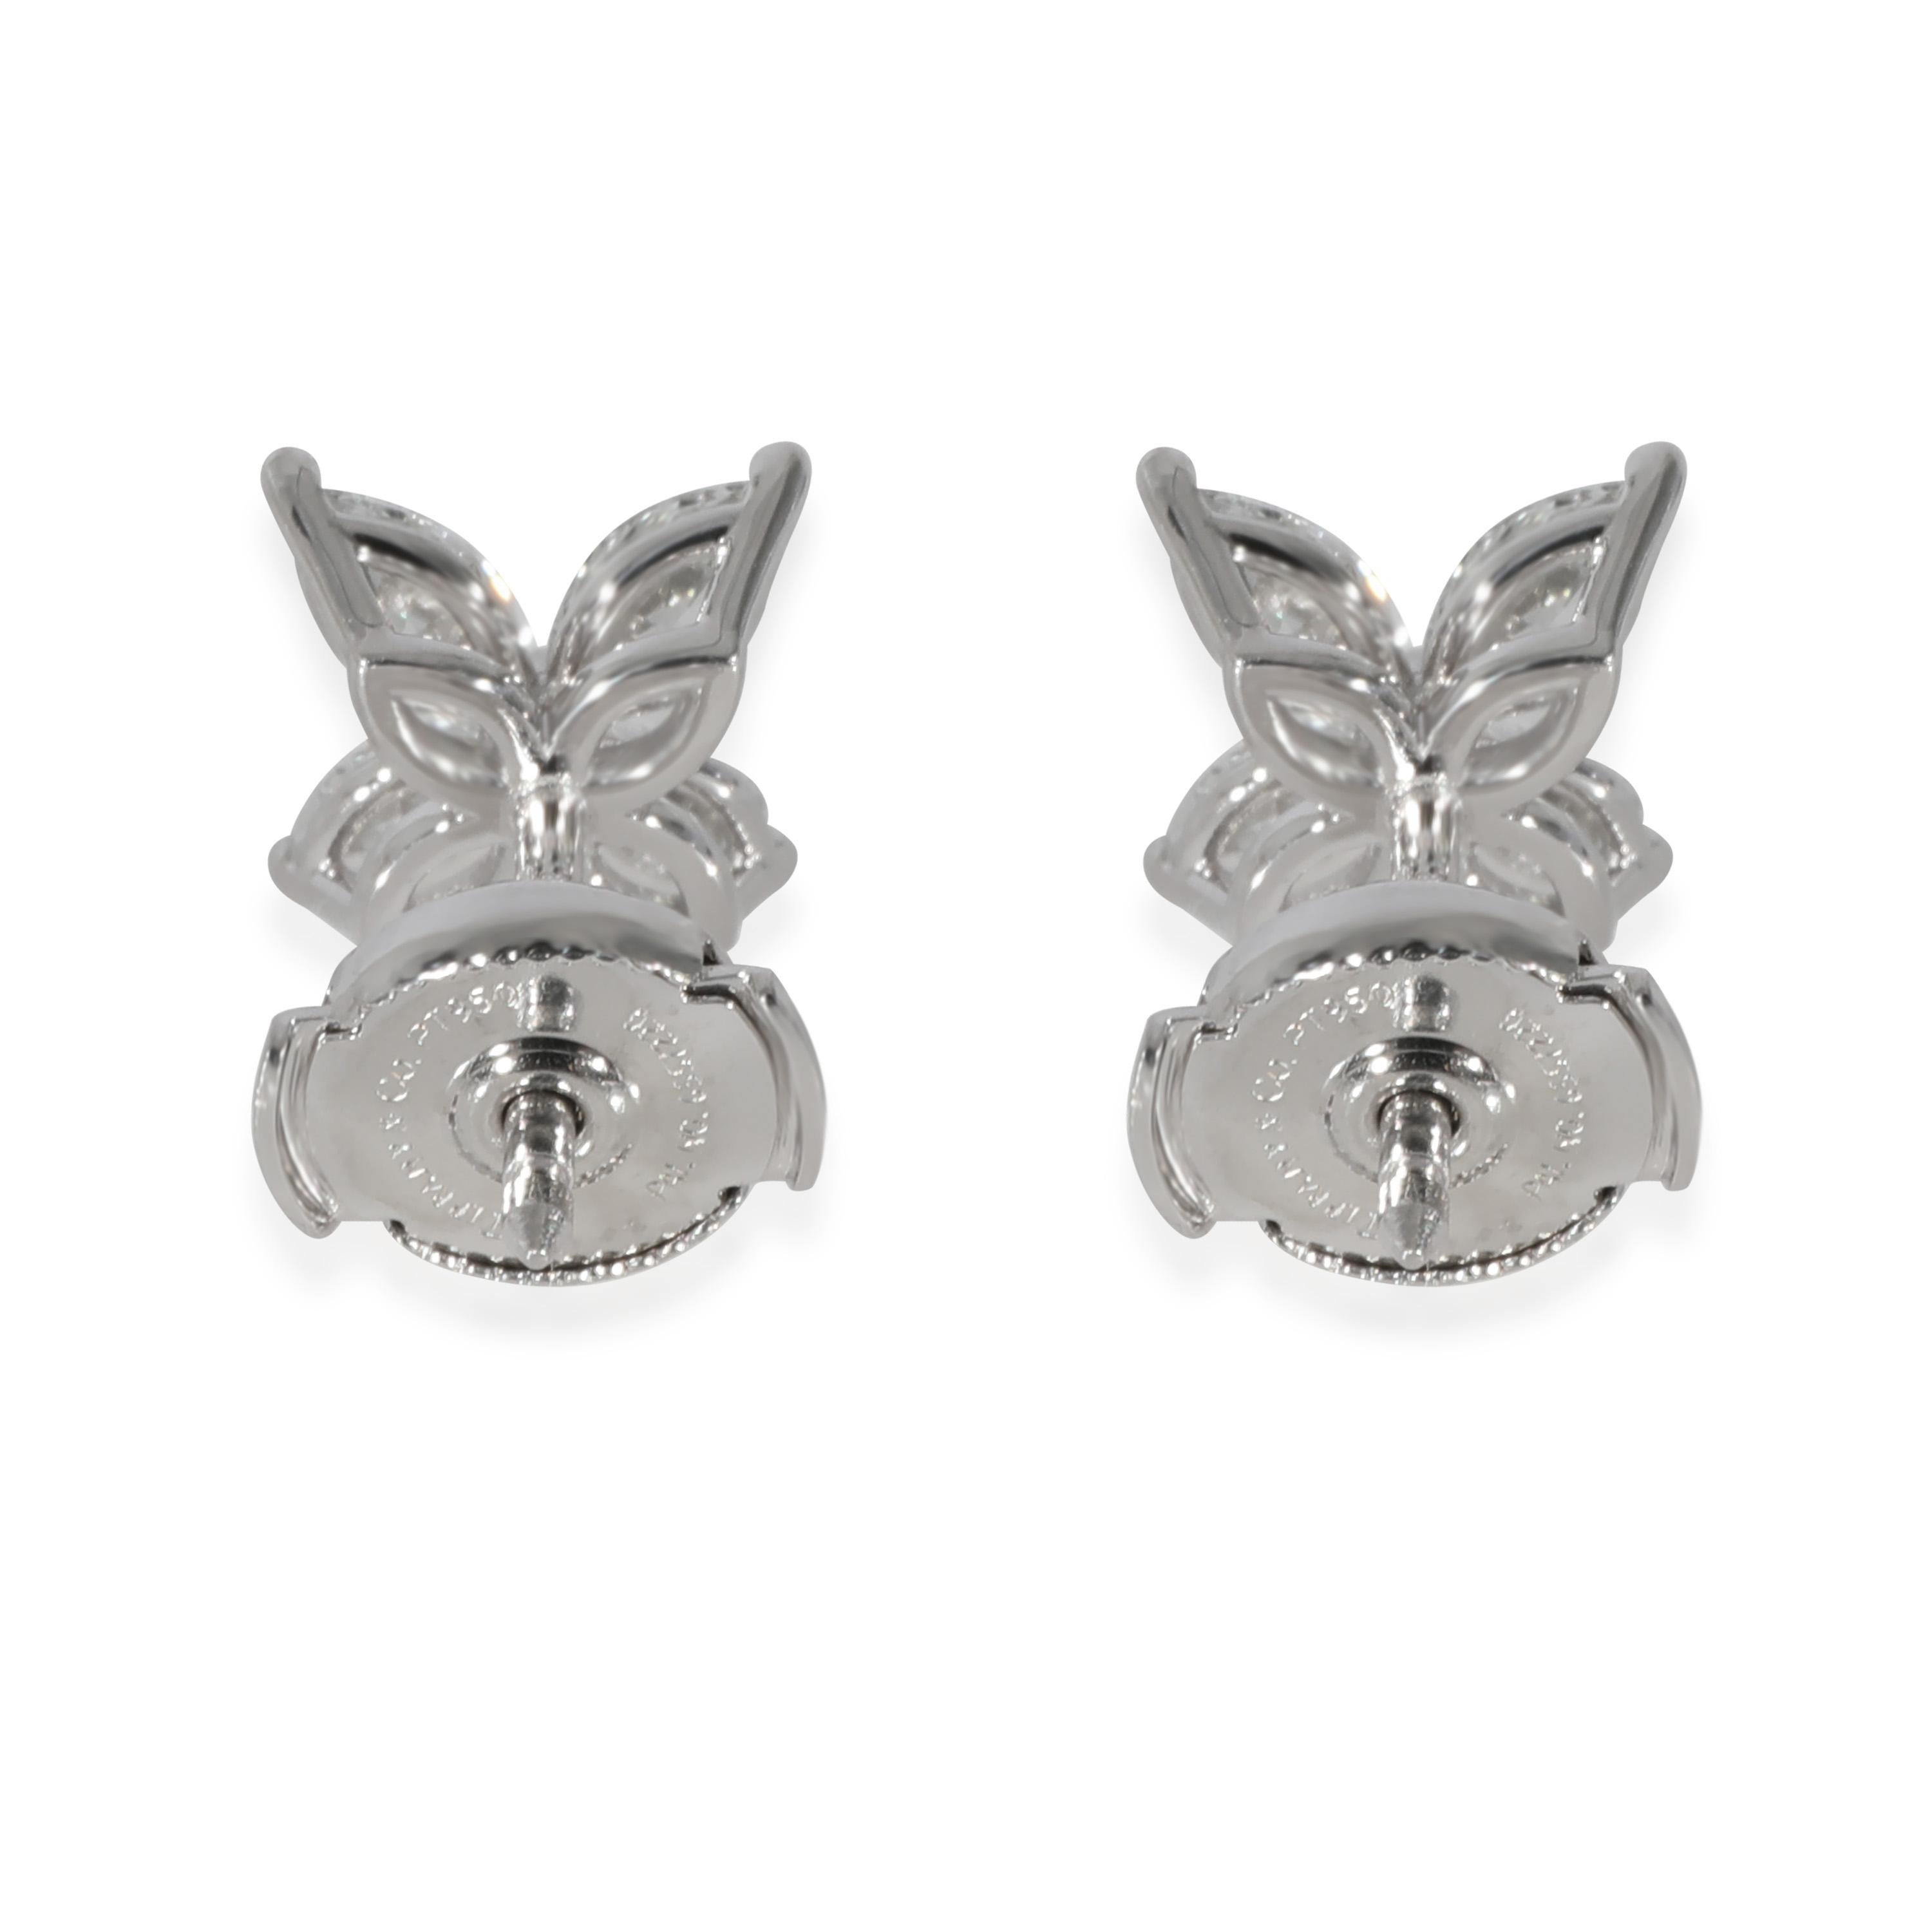 Tiffany & Co. Victoria Diamond Earrings in  Platinum 0.92 CTW

PRIMARY DETAILS
SKU: 127973
Listing Title: Tiffany & Co. Victoria Diamond Earrings in  Platinum 0.92 CTW
Condition Description: Retails for 11500 USD. In excellent condition and recently